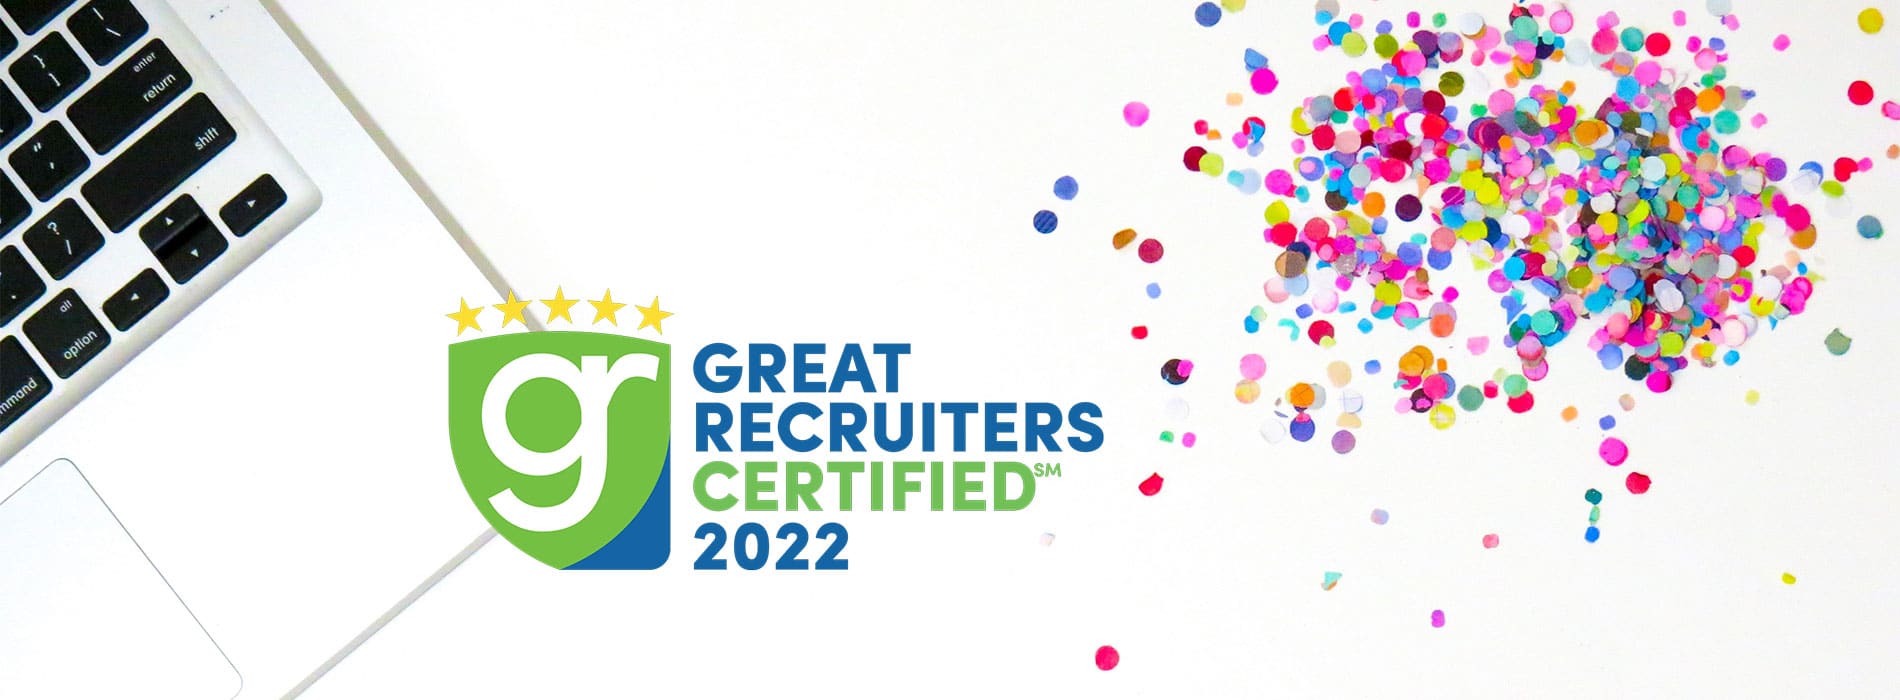 Great Recruiters Certified 2022 Doherty Staffing